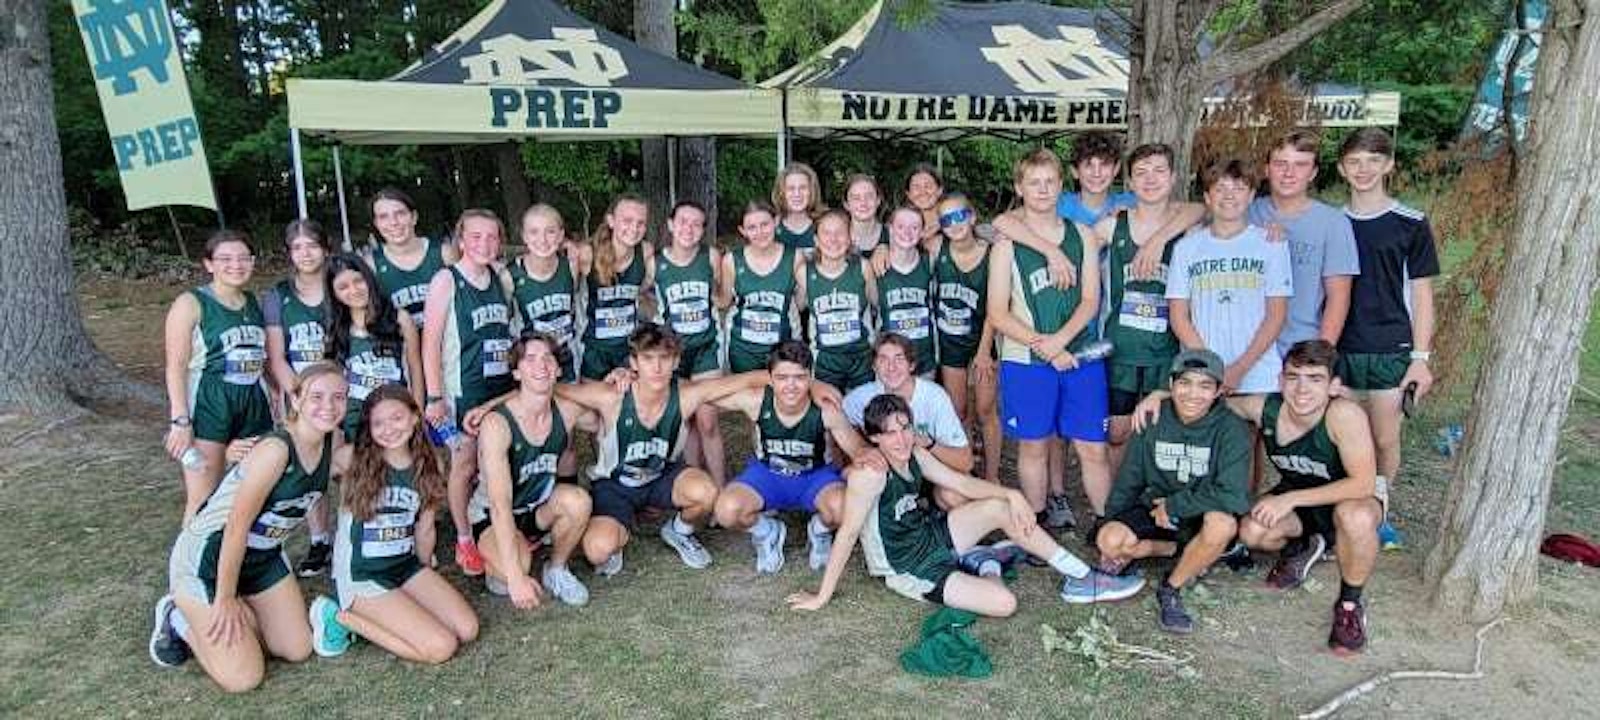 Kim Kriesel, who teaches at Notre Dame Lower School, serves as assistant coach of the Notre Dame Prep cross country team. She says faith is intertwined with everything the student-athletes do.